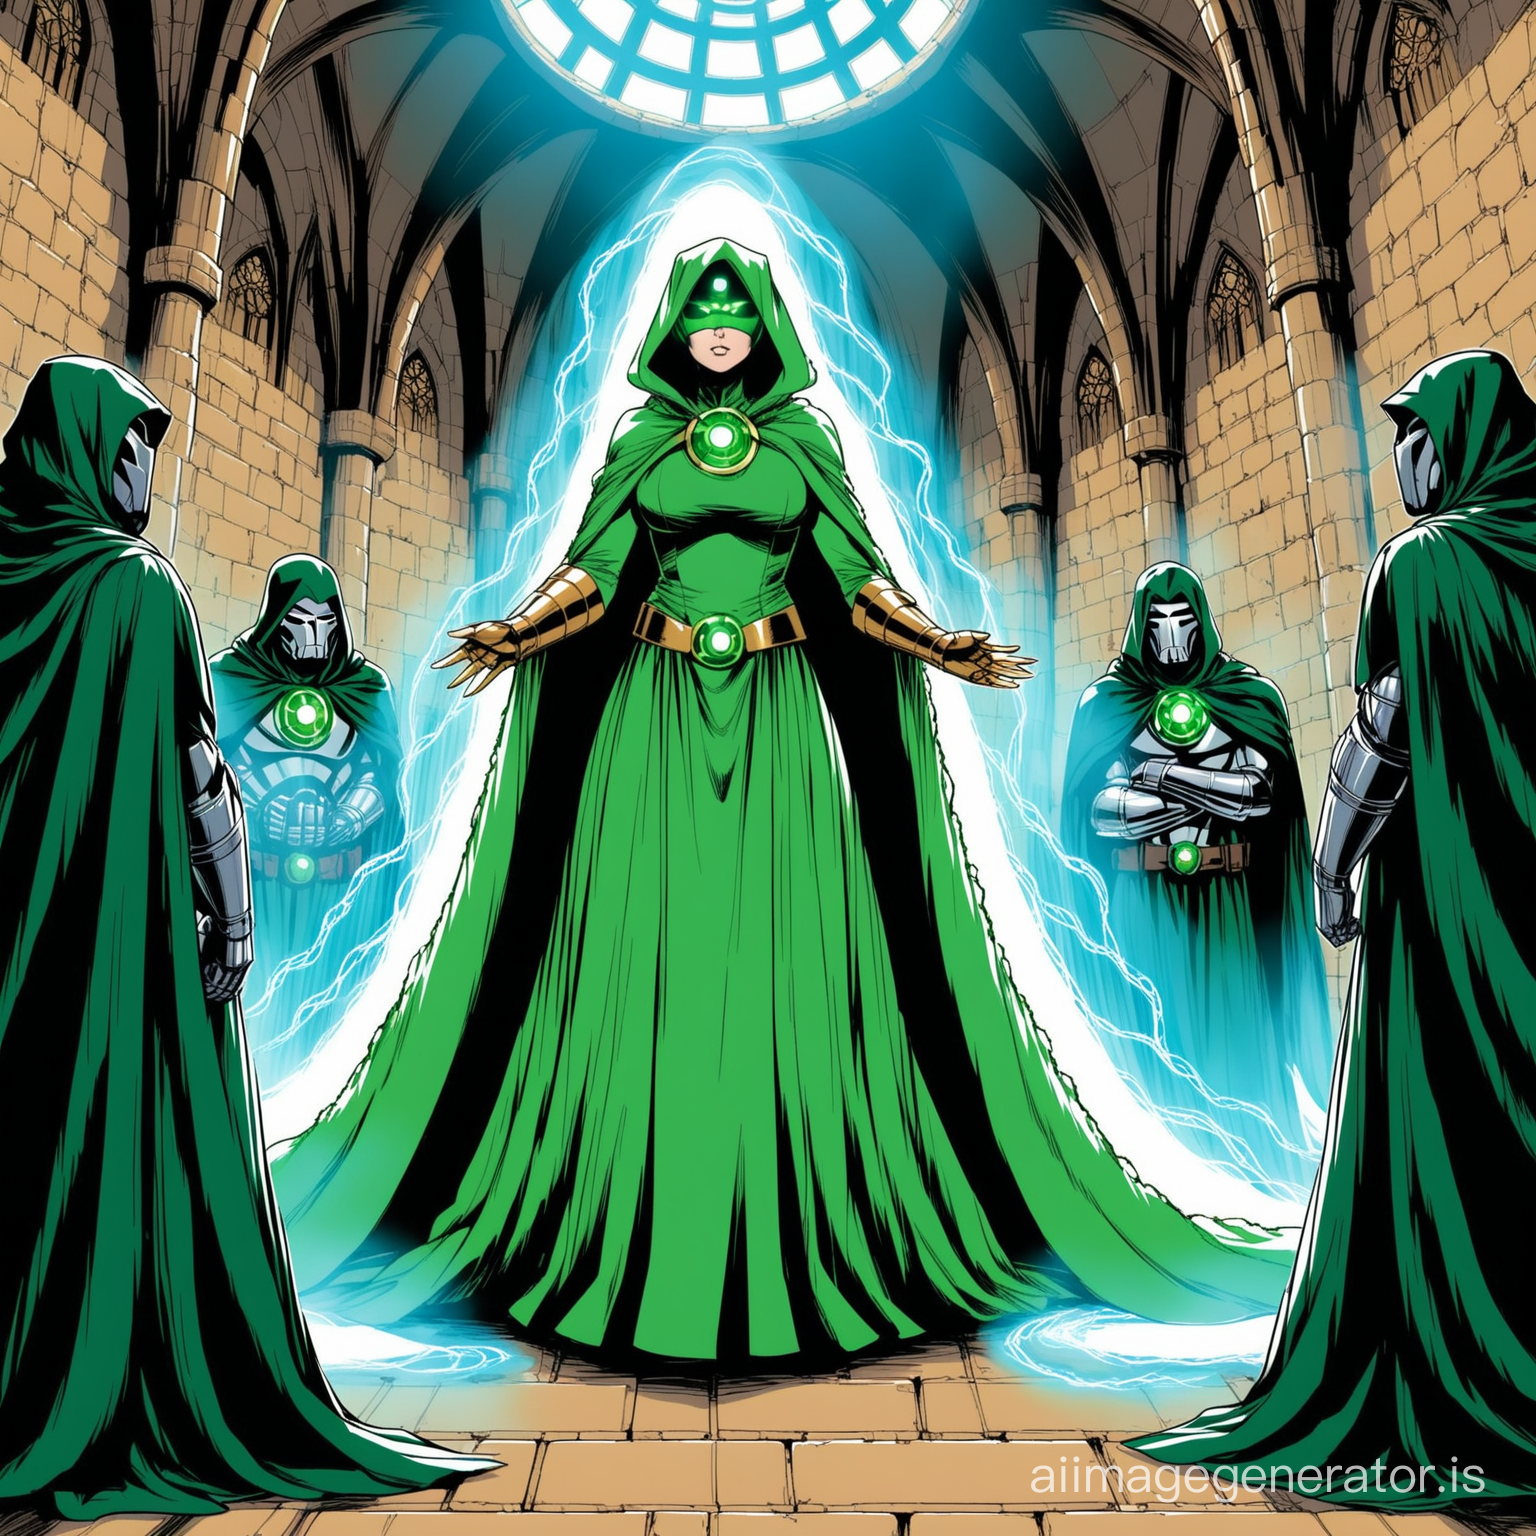 Doctor Doom hypnotizing Sue Storm in a floor-length Medieval dress with heavy cloak and wimple veil